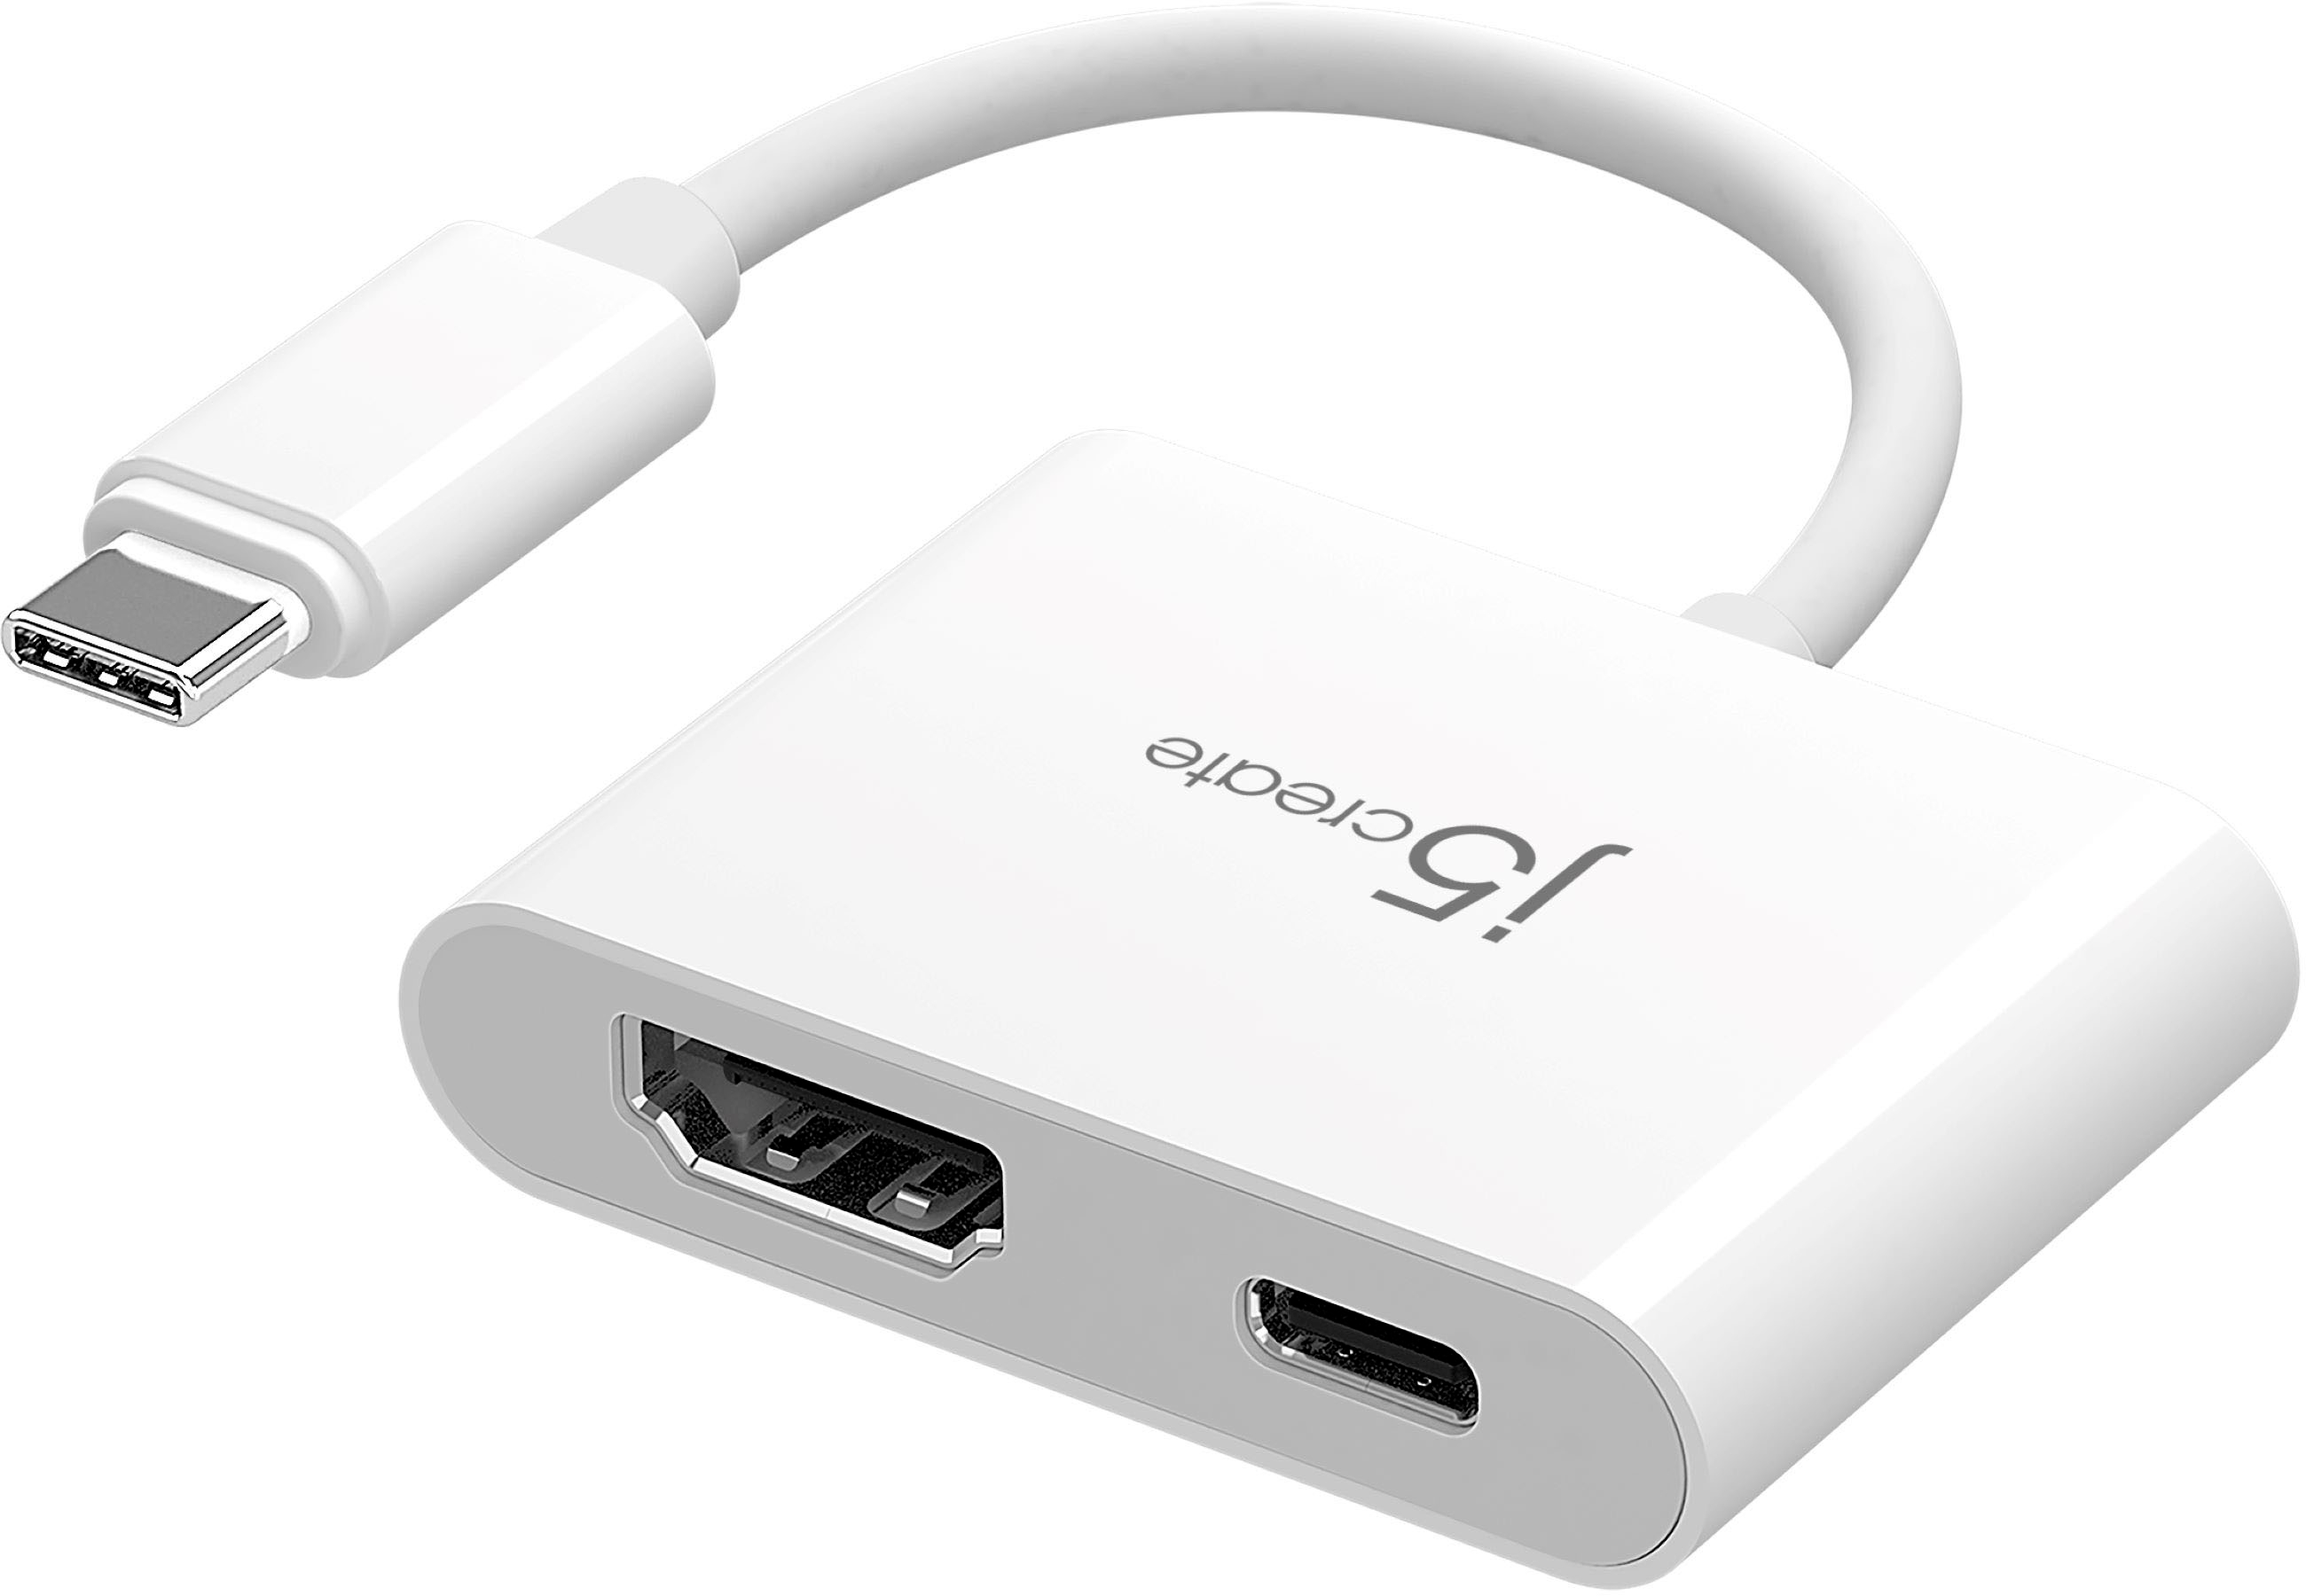 Insignia™ USB-C to 4K HDMI Multiport Adapter with  - Best Buy